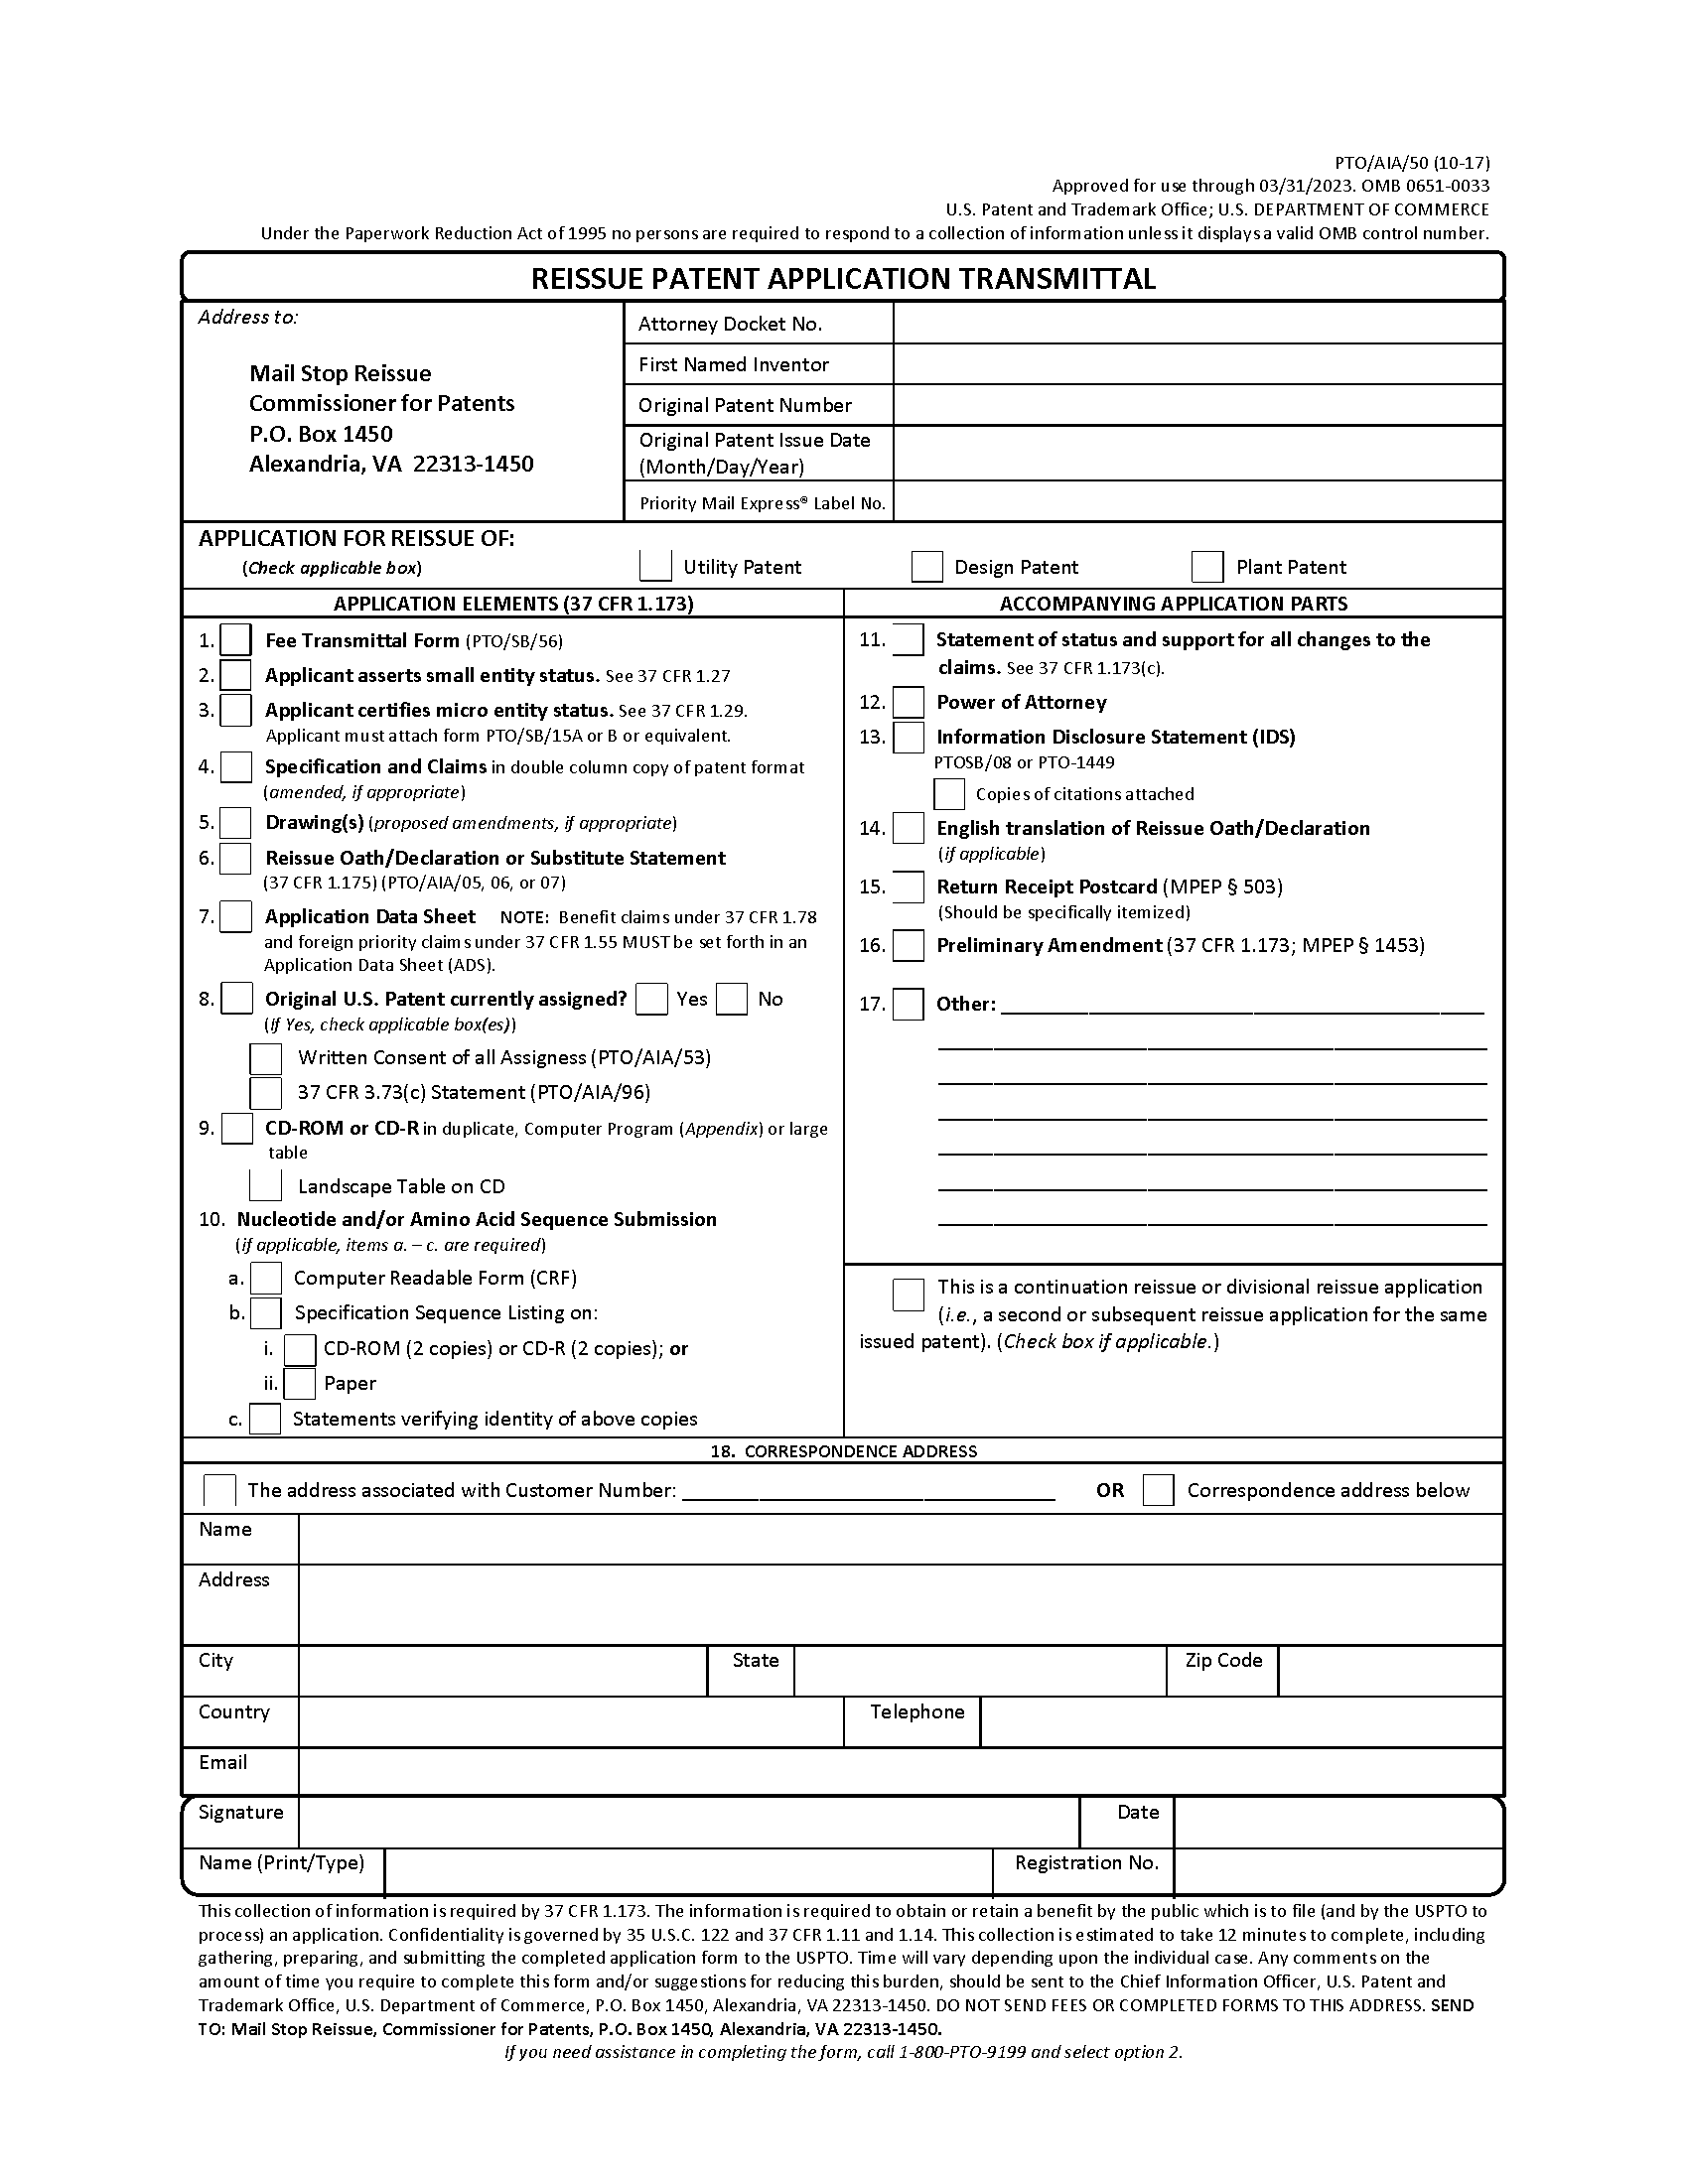 Reissue Patent Application Transmittal Page 1